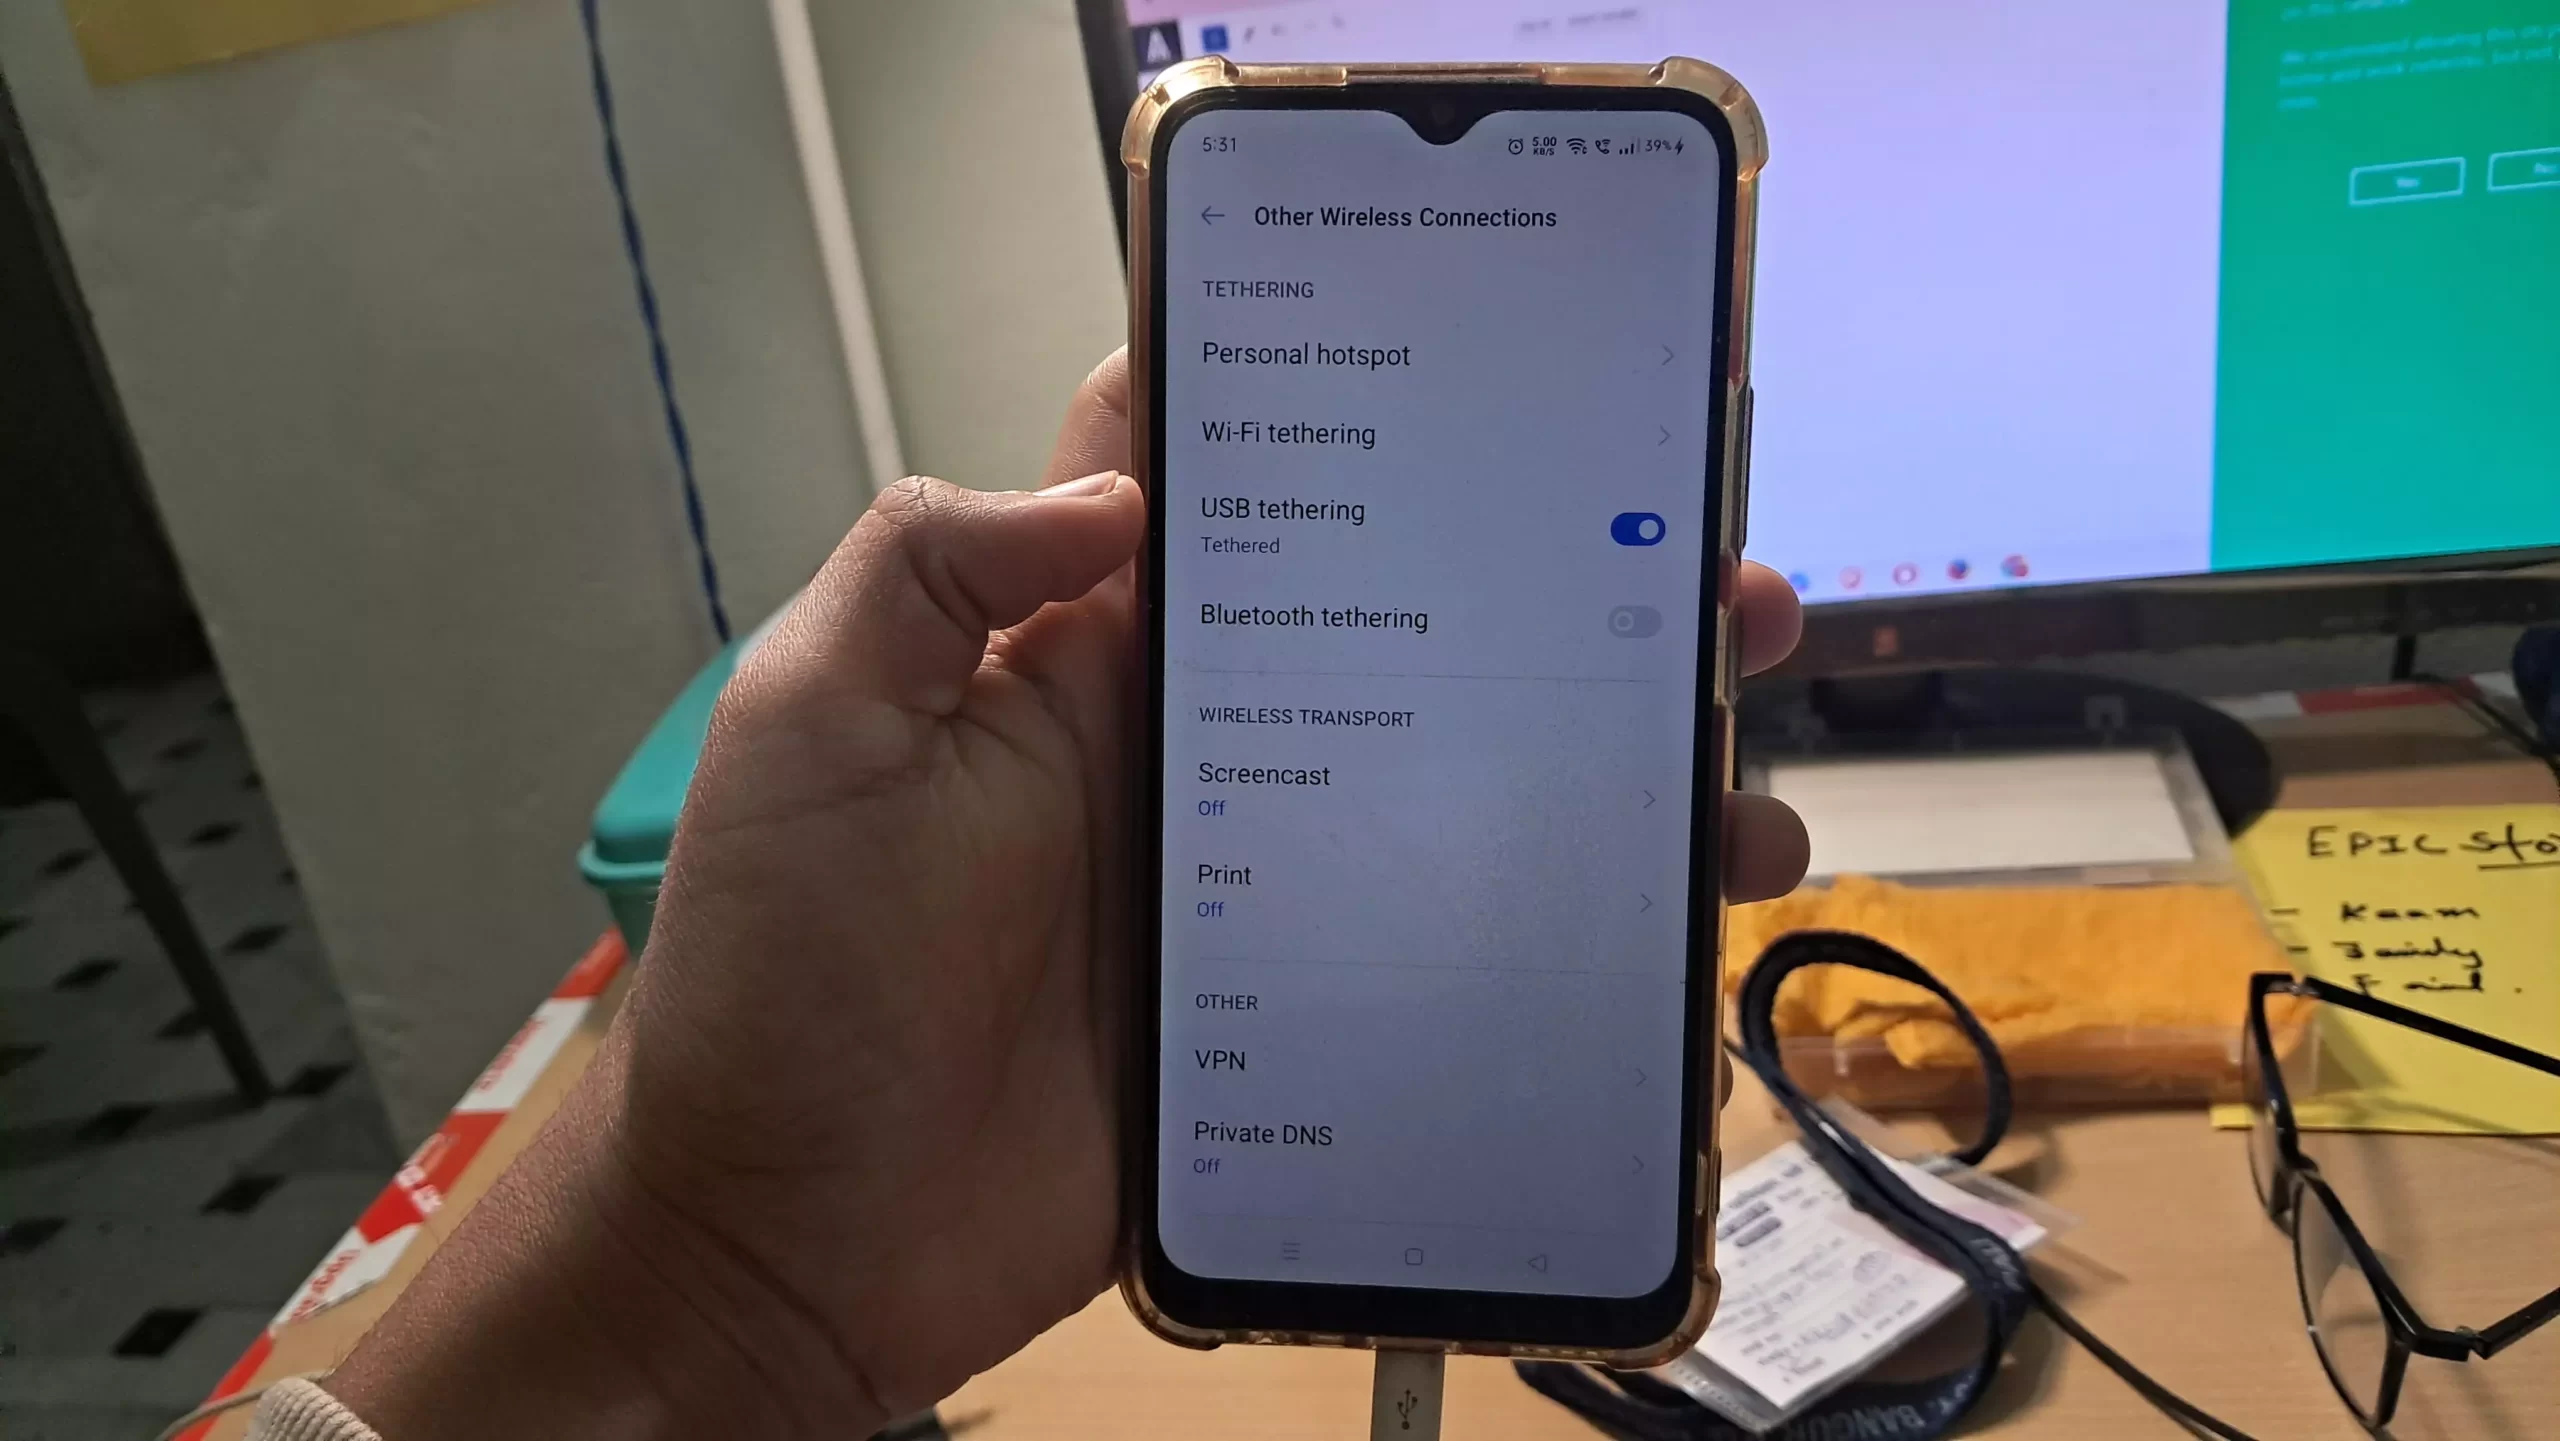 other wireless connections with usb tethering turned onn in hands on android